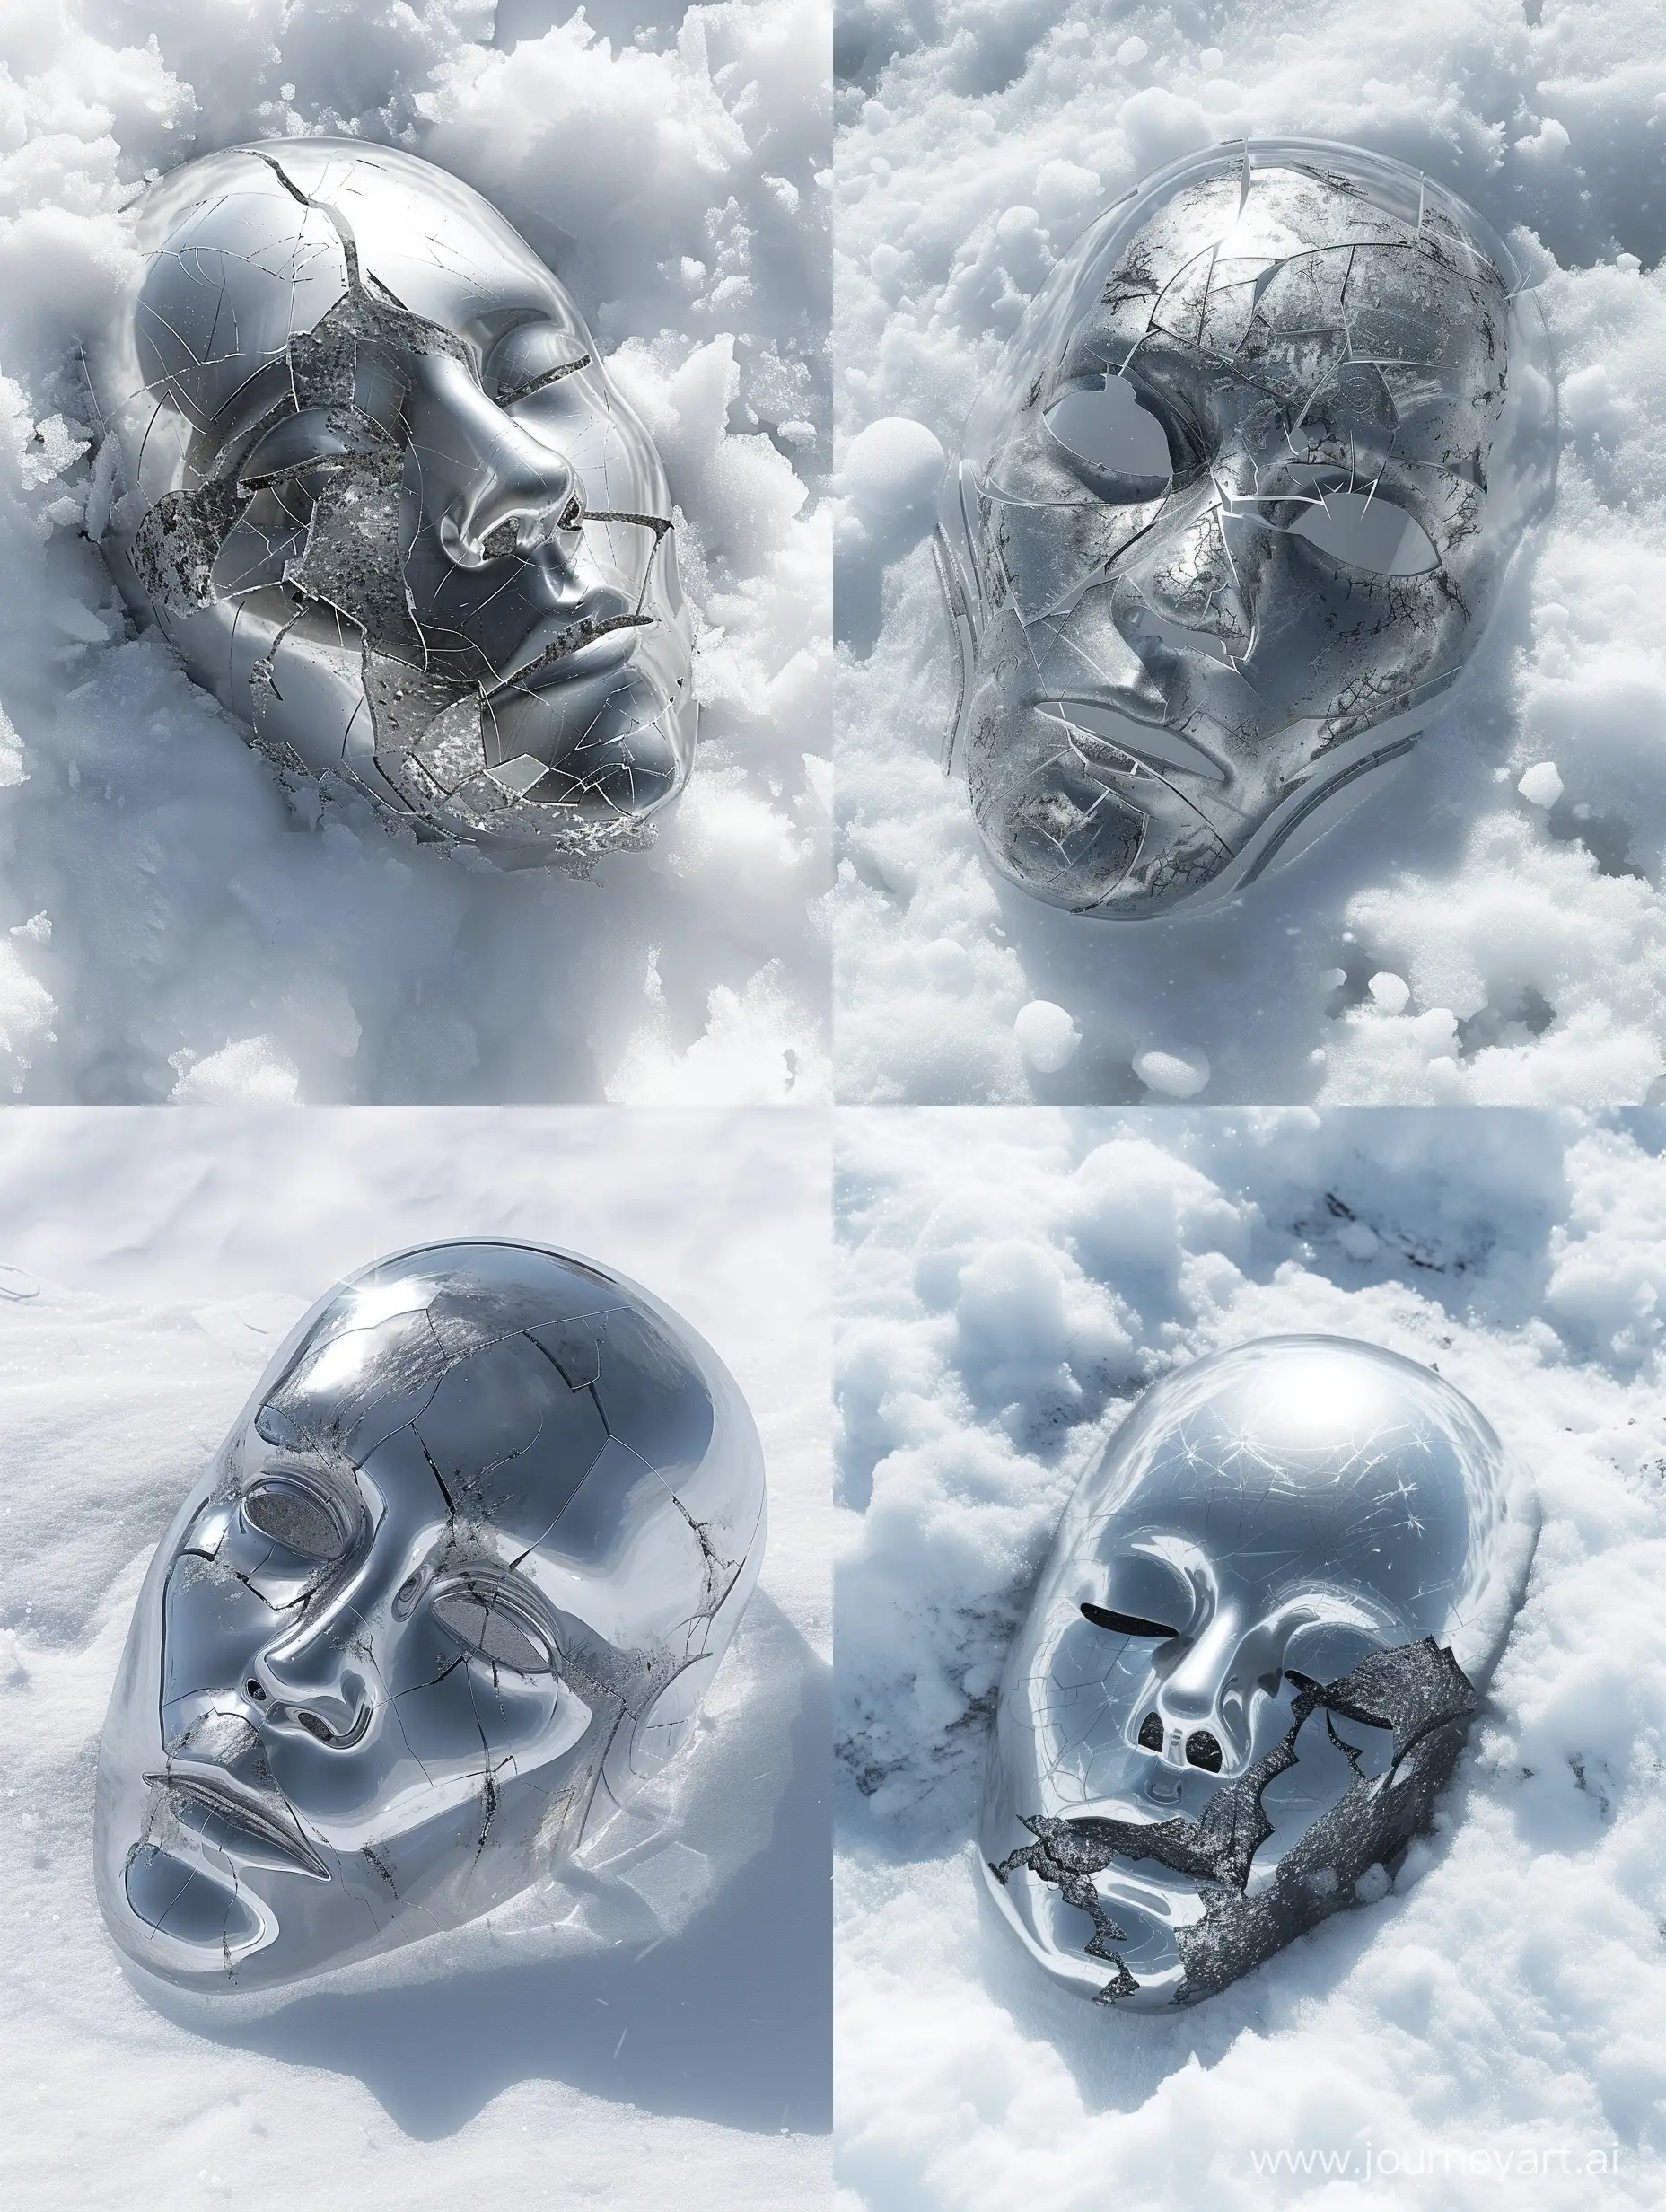 music album cover, clear art, silver si fi mask lies in the snow, cracked, darksouls style